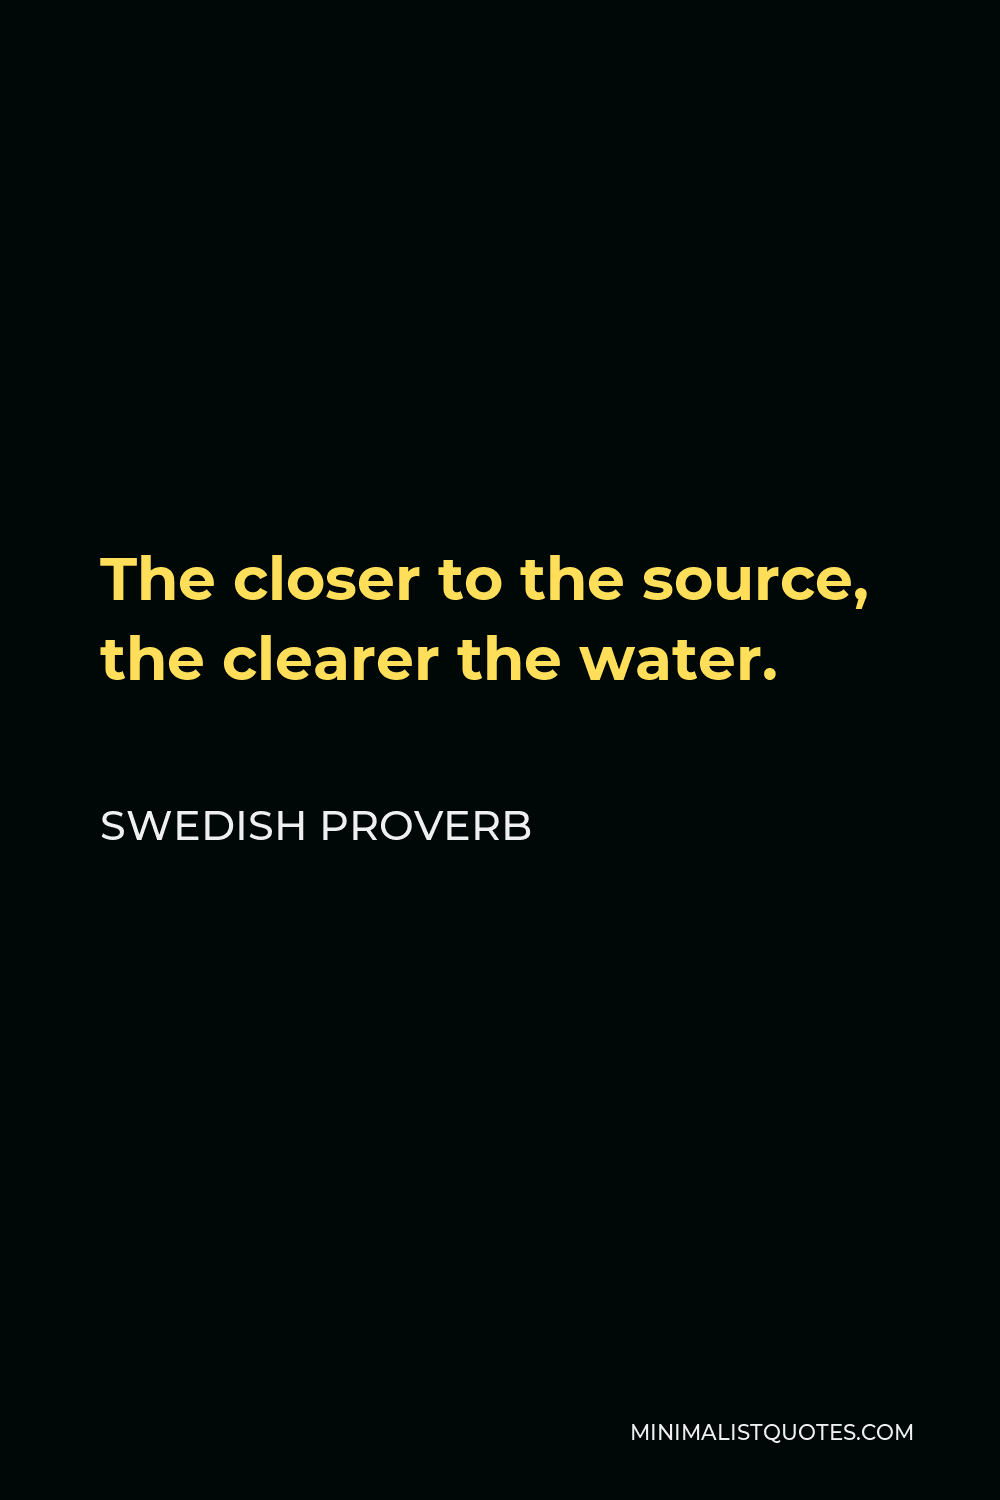 Swedish Proverb Quote - The closer to the source, the clearer the water.